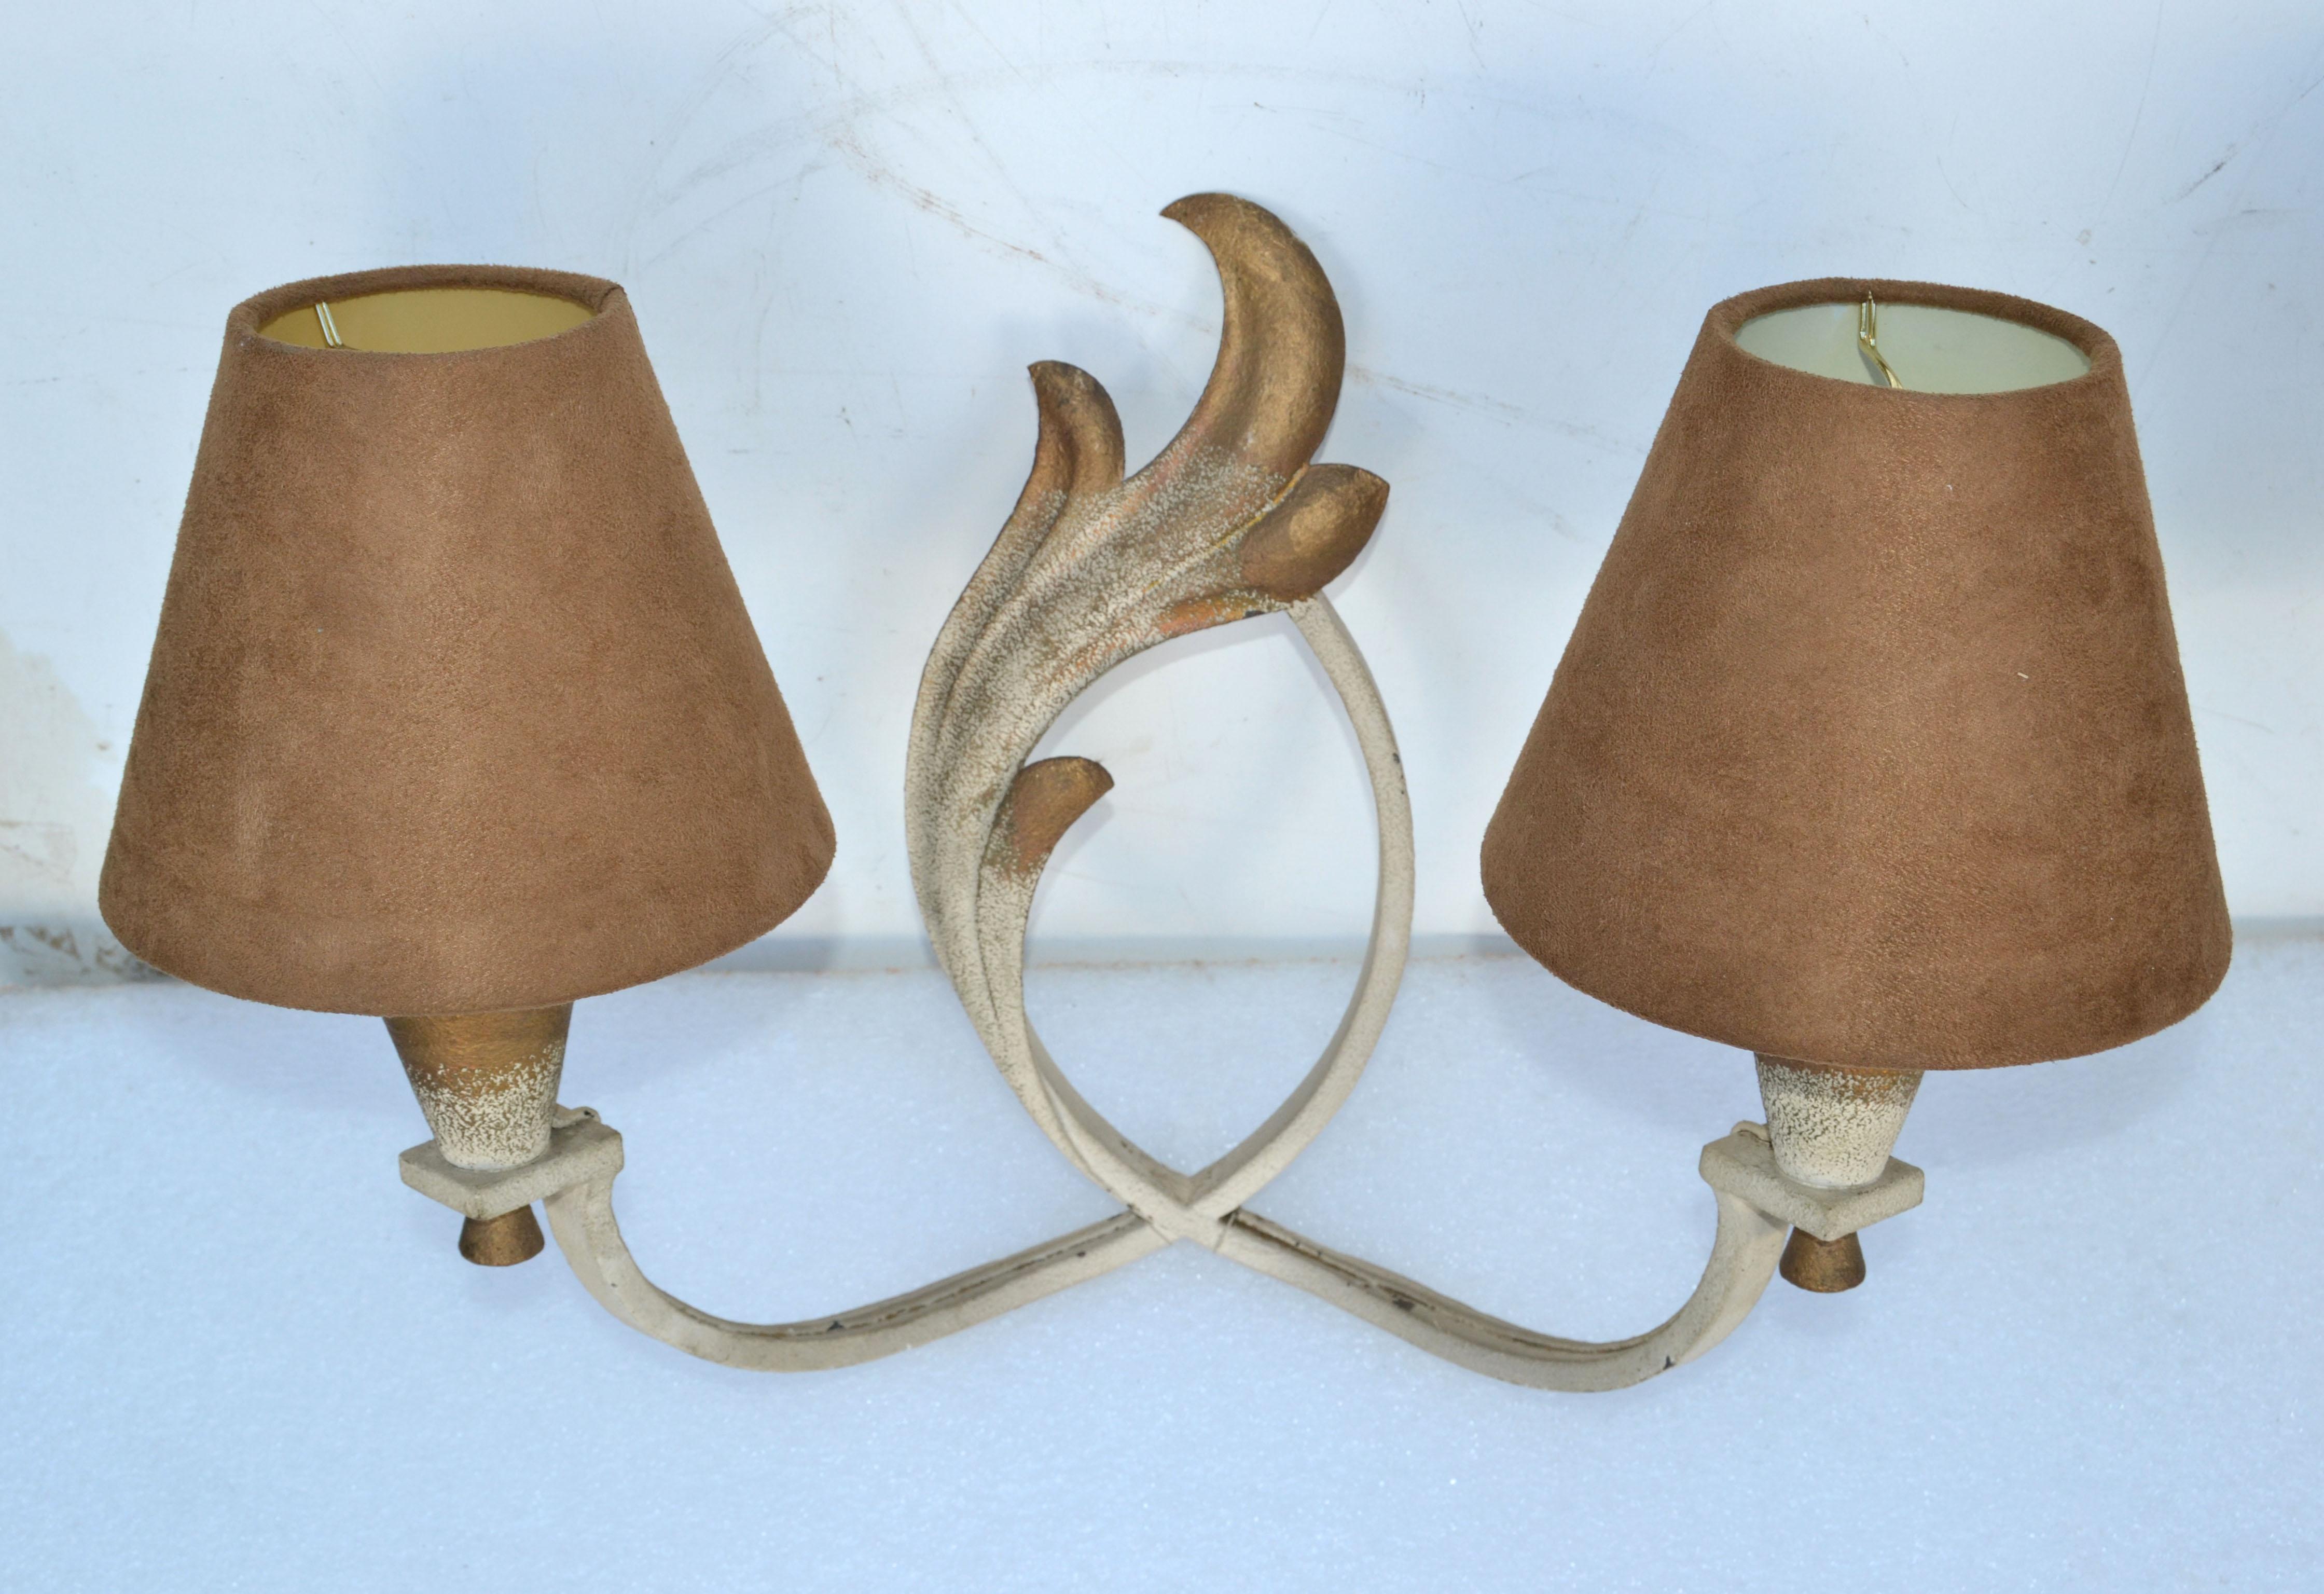 20th Century French Wrought Iron Sconces & Shades, Wall Lights Art Deco 1950 For Sale